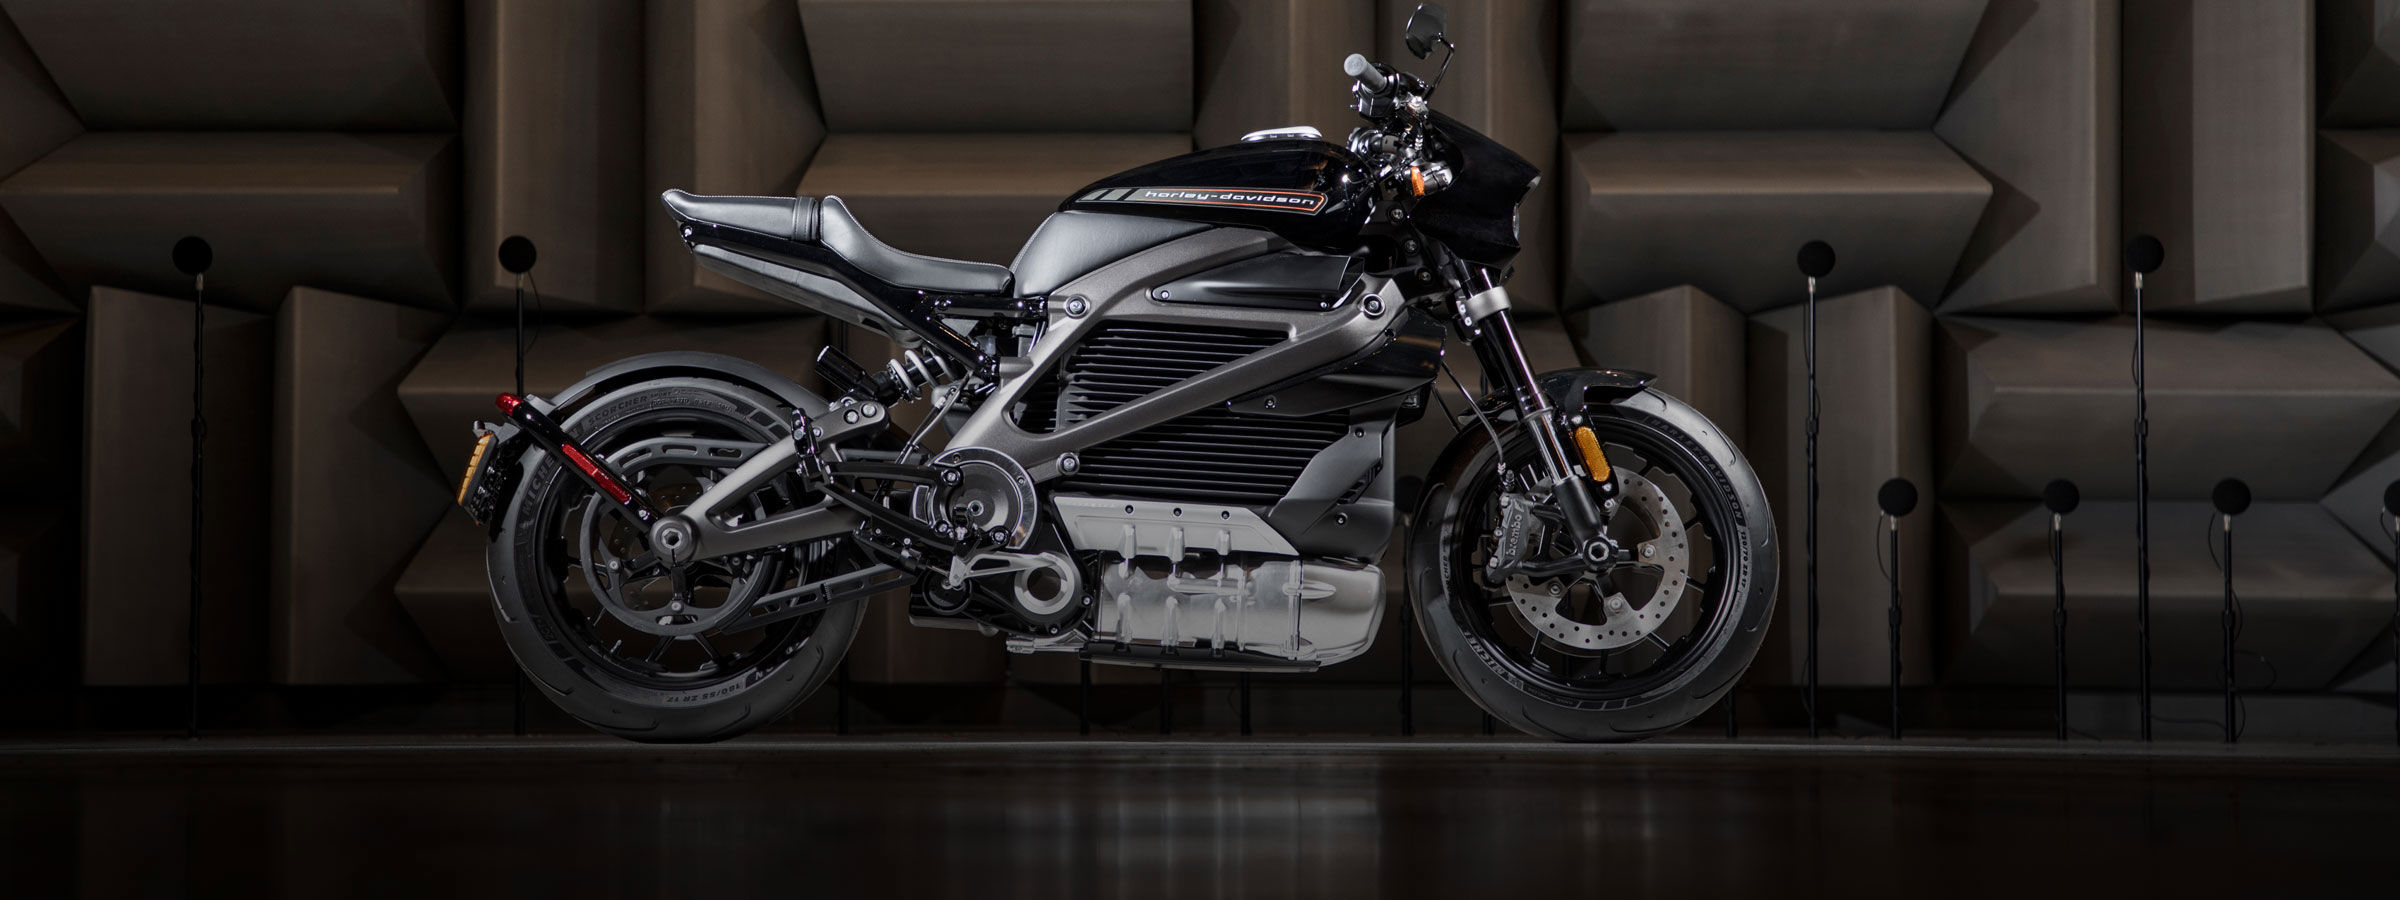 Harley Davidson Rides Into The Future With Connected Electric Motorcycles